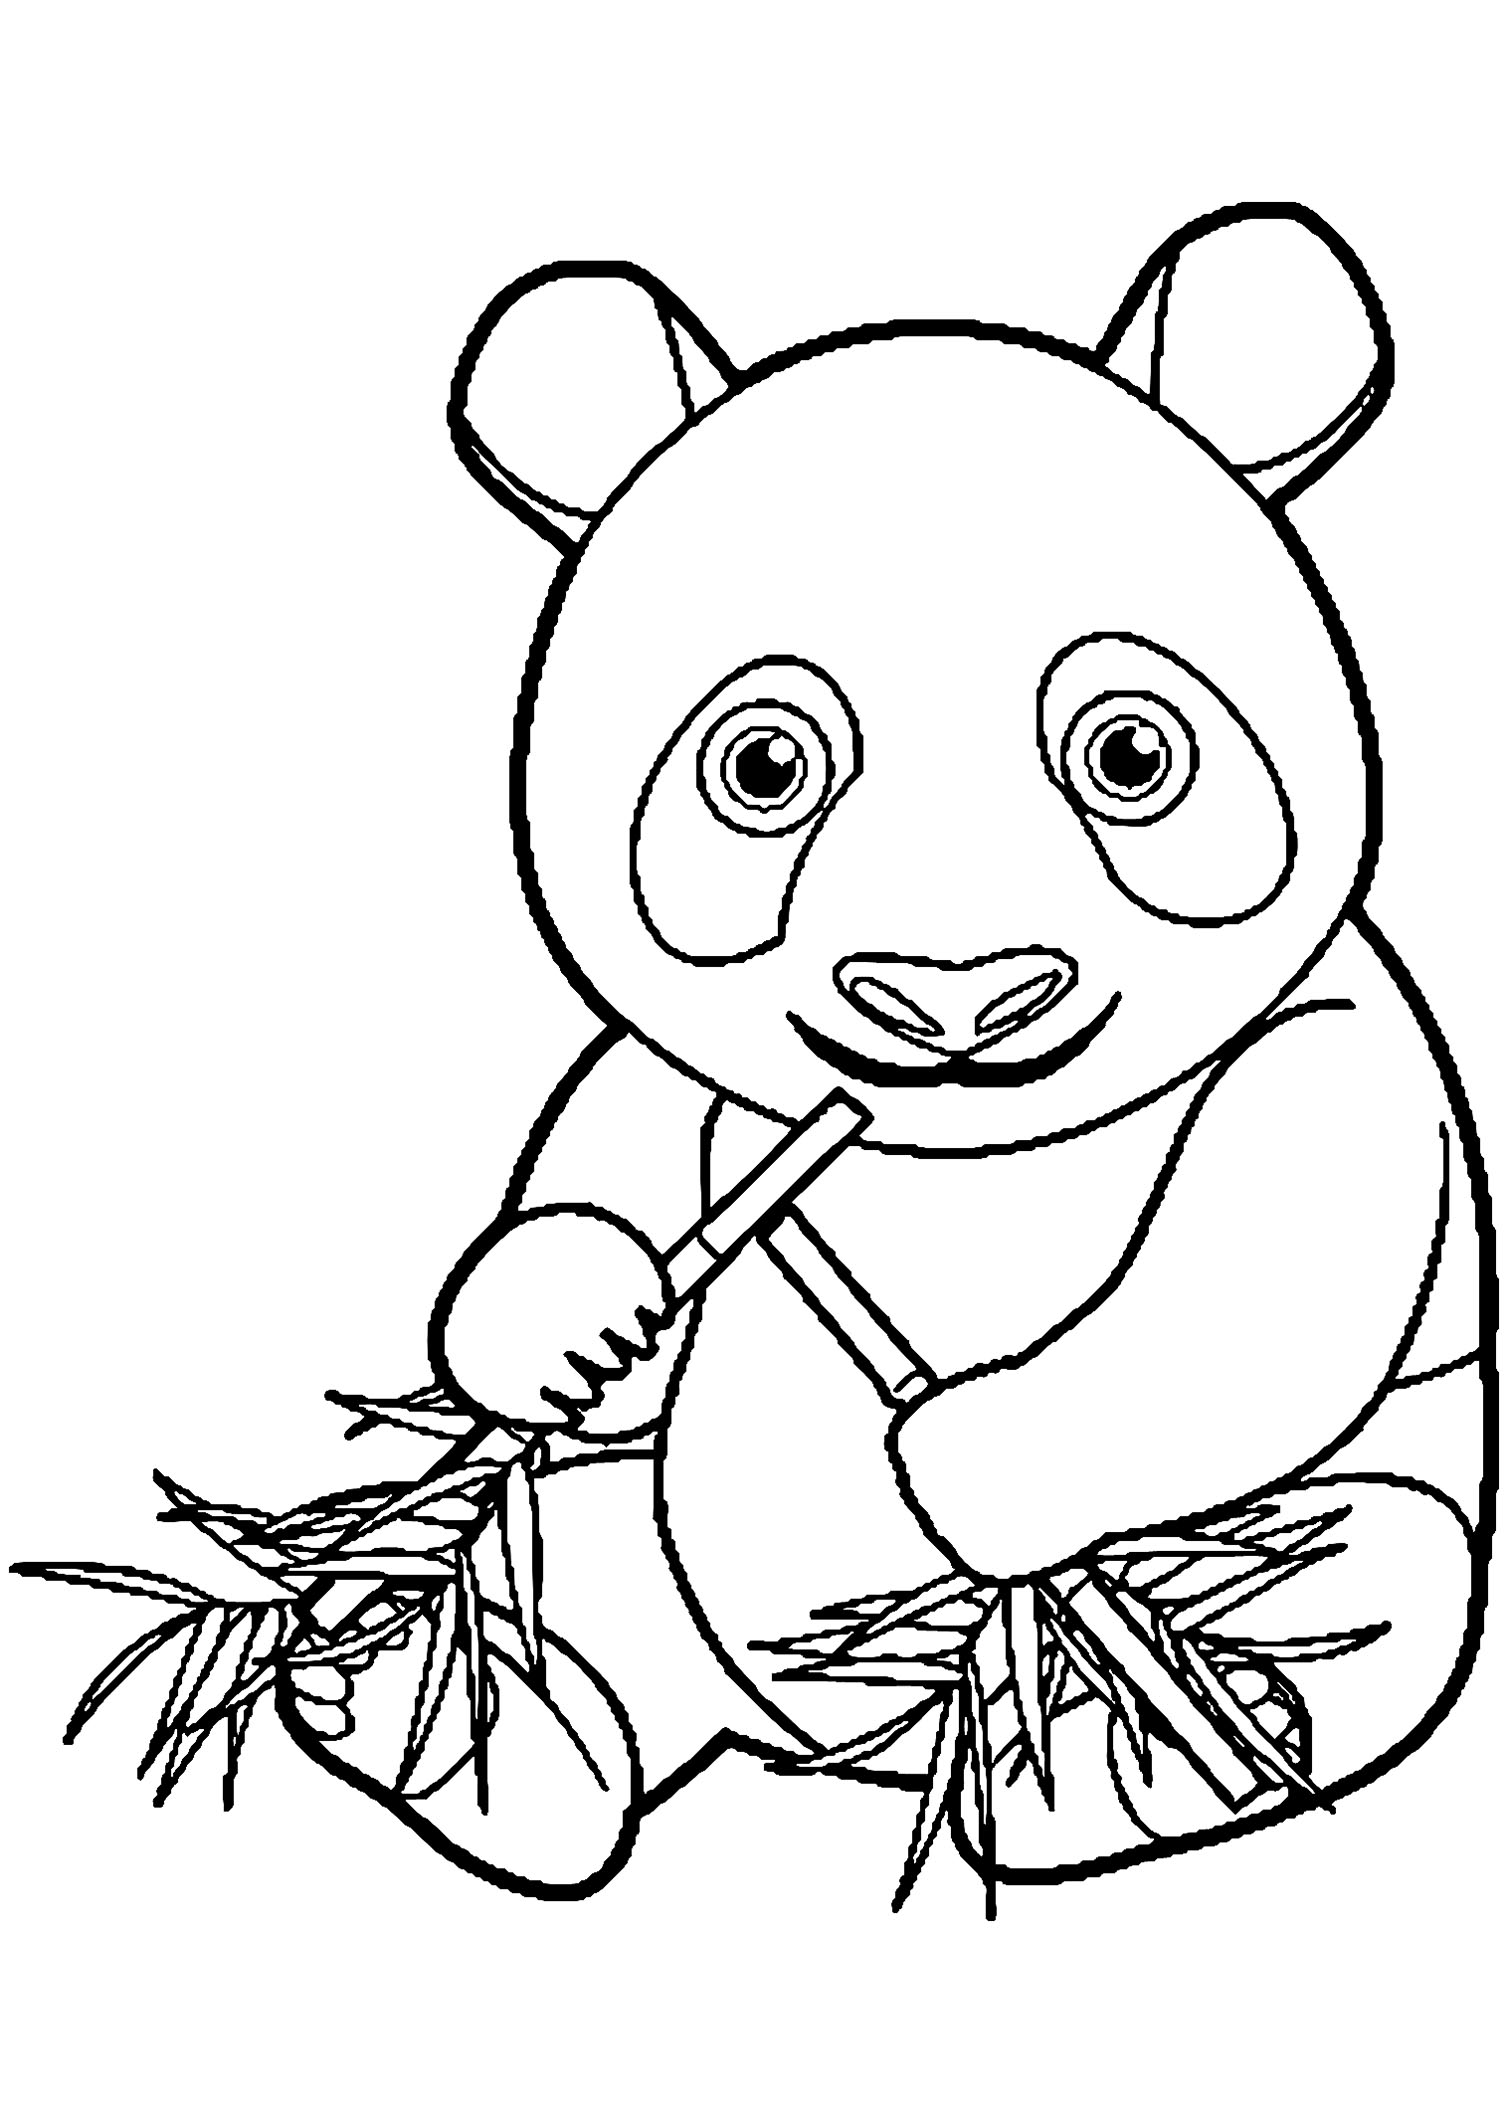 free-printable-panda-coloring-pages-customize-and-print